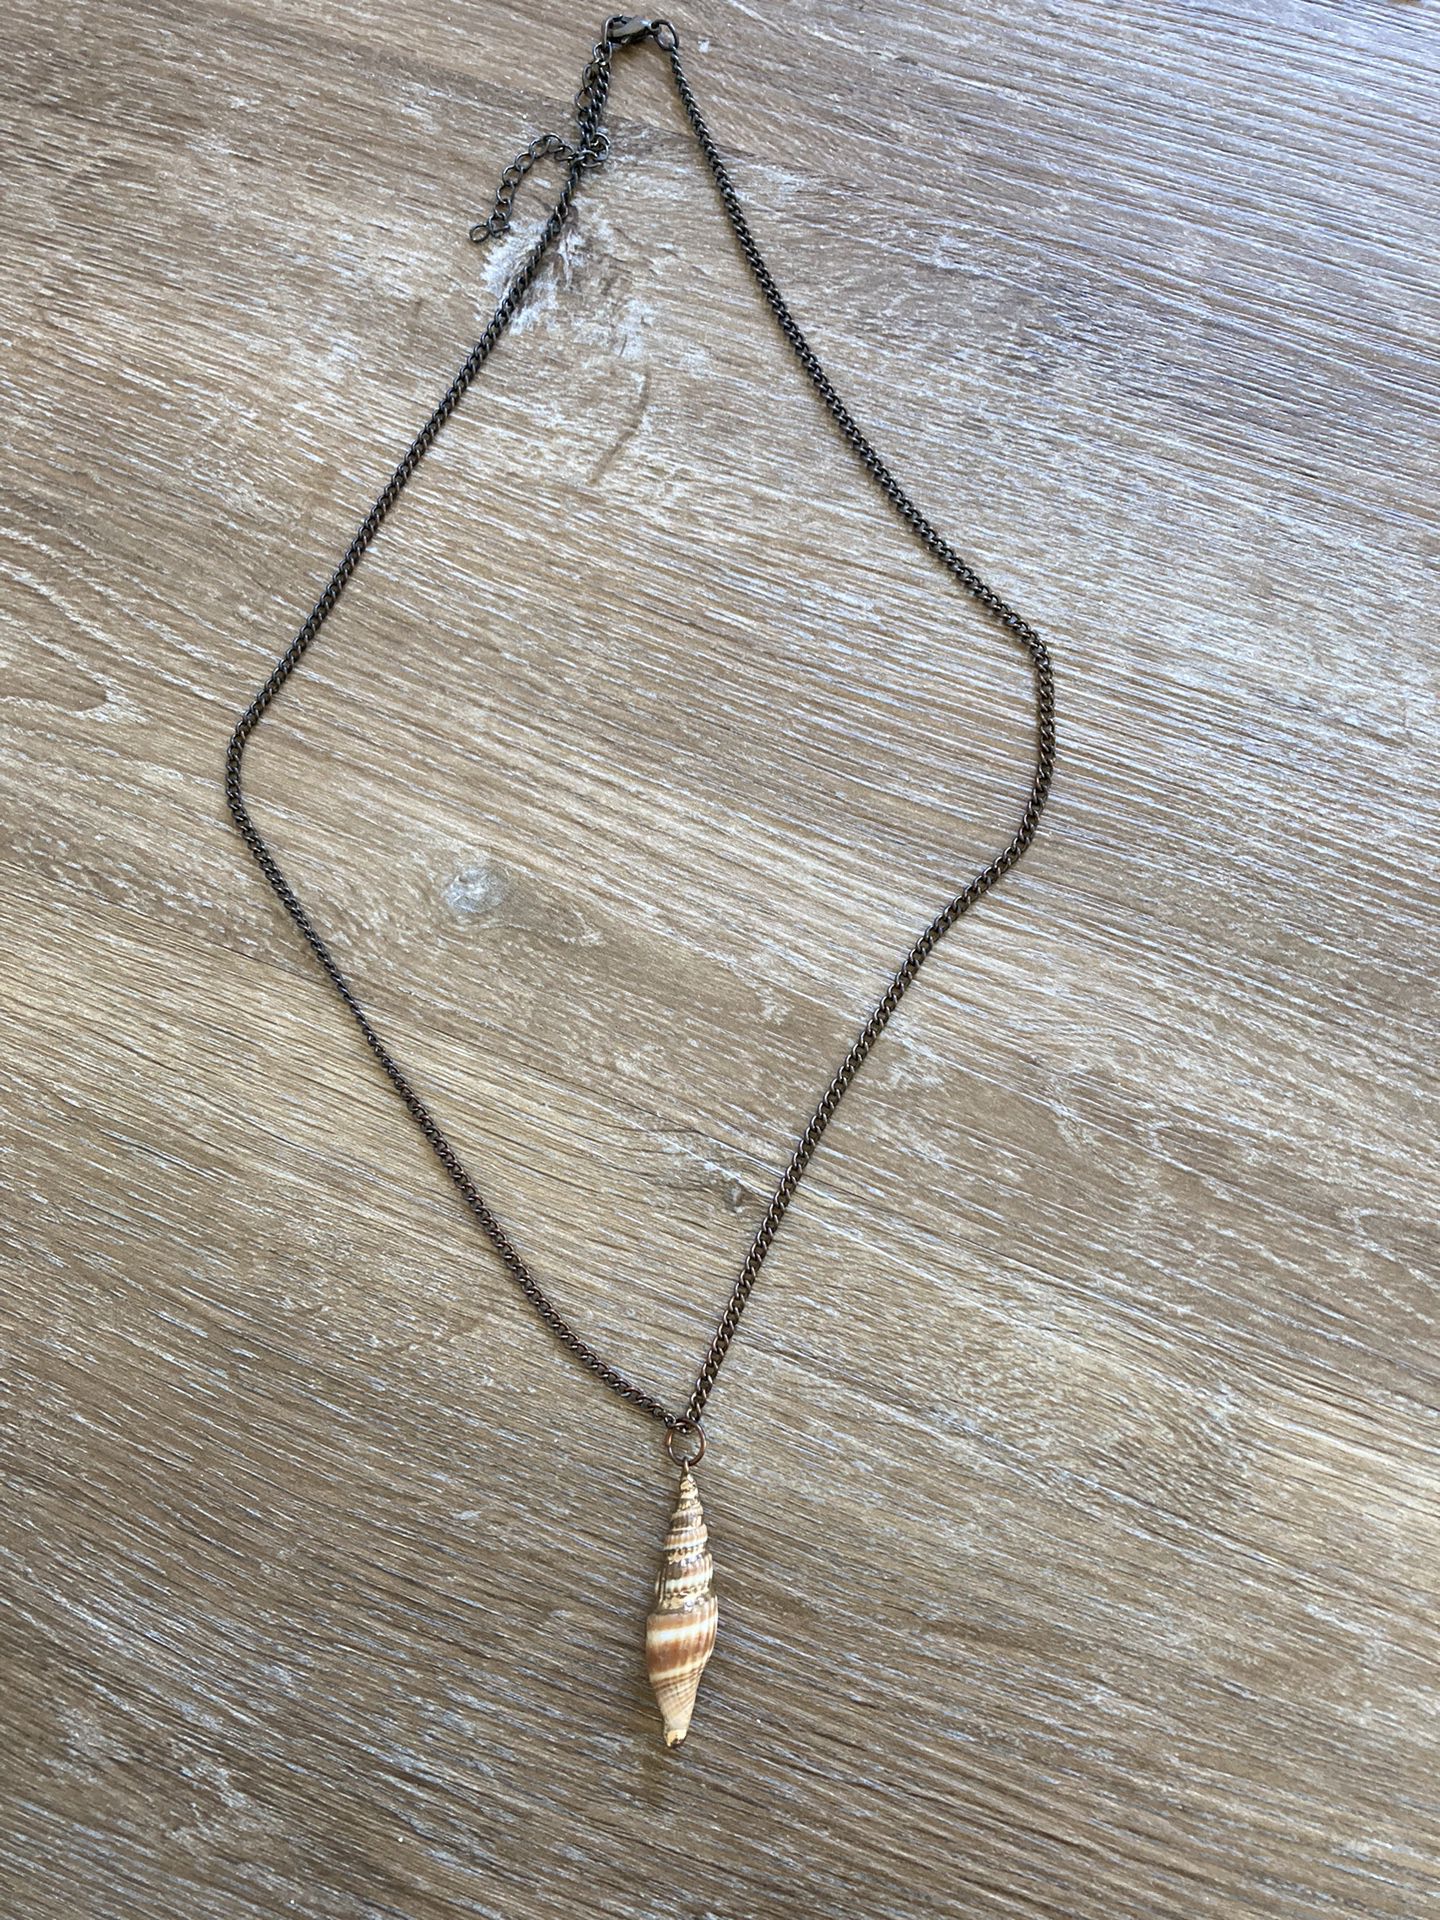 Gold Tipped Seashell Necklace